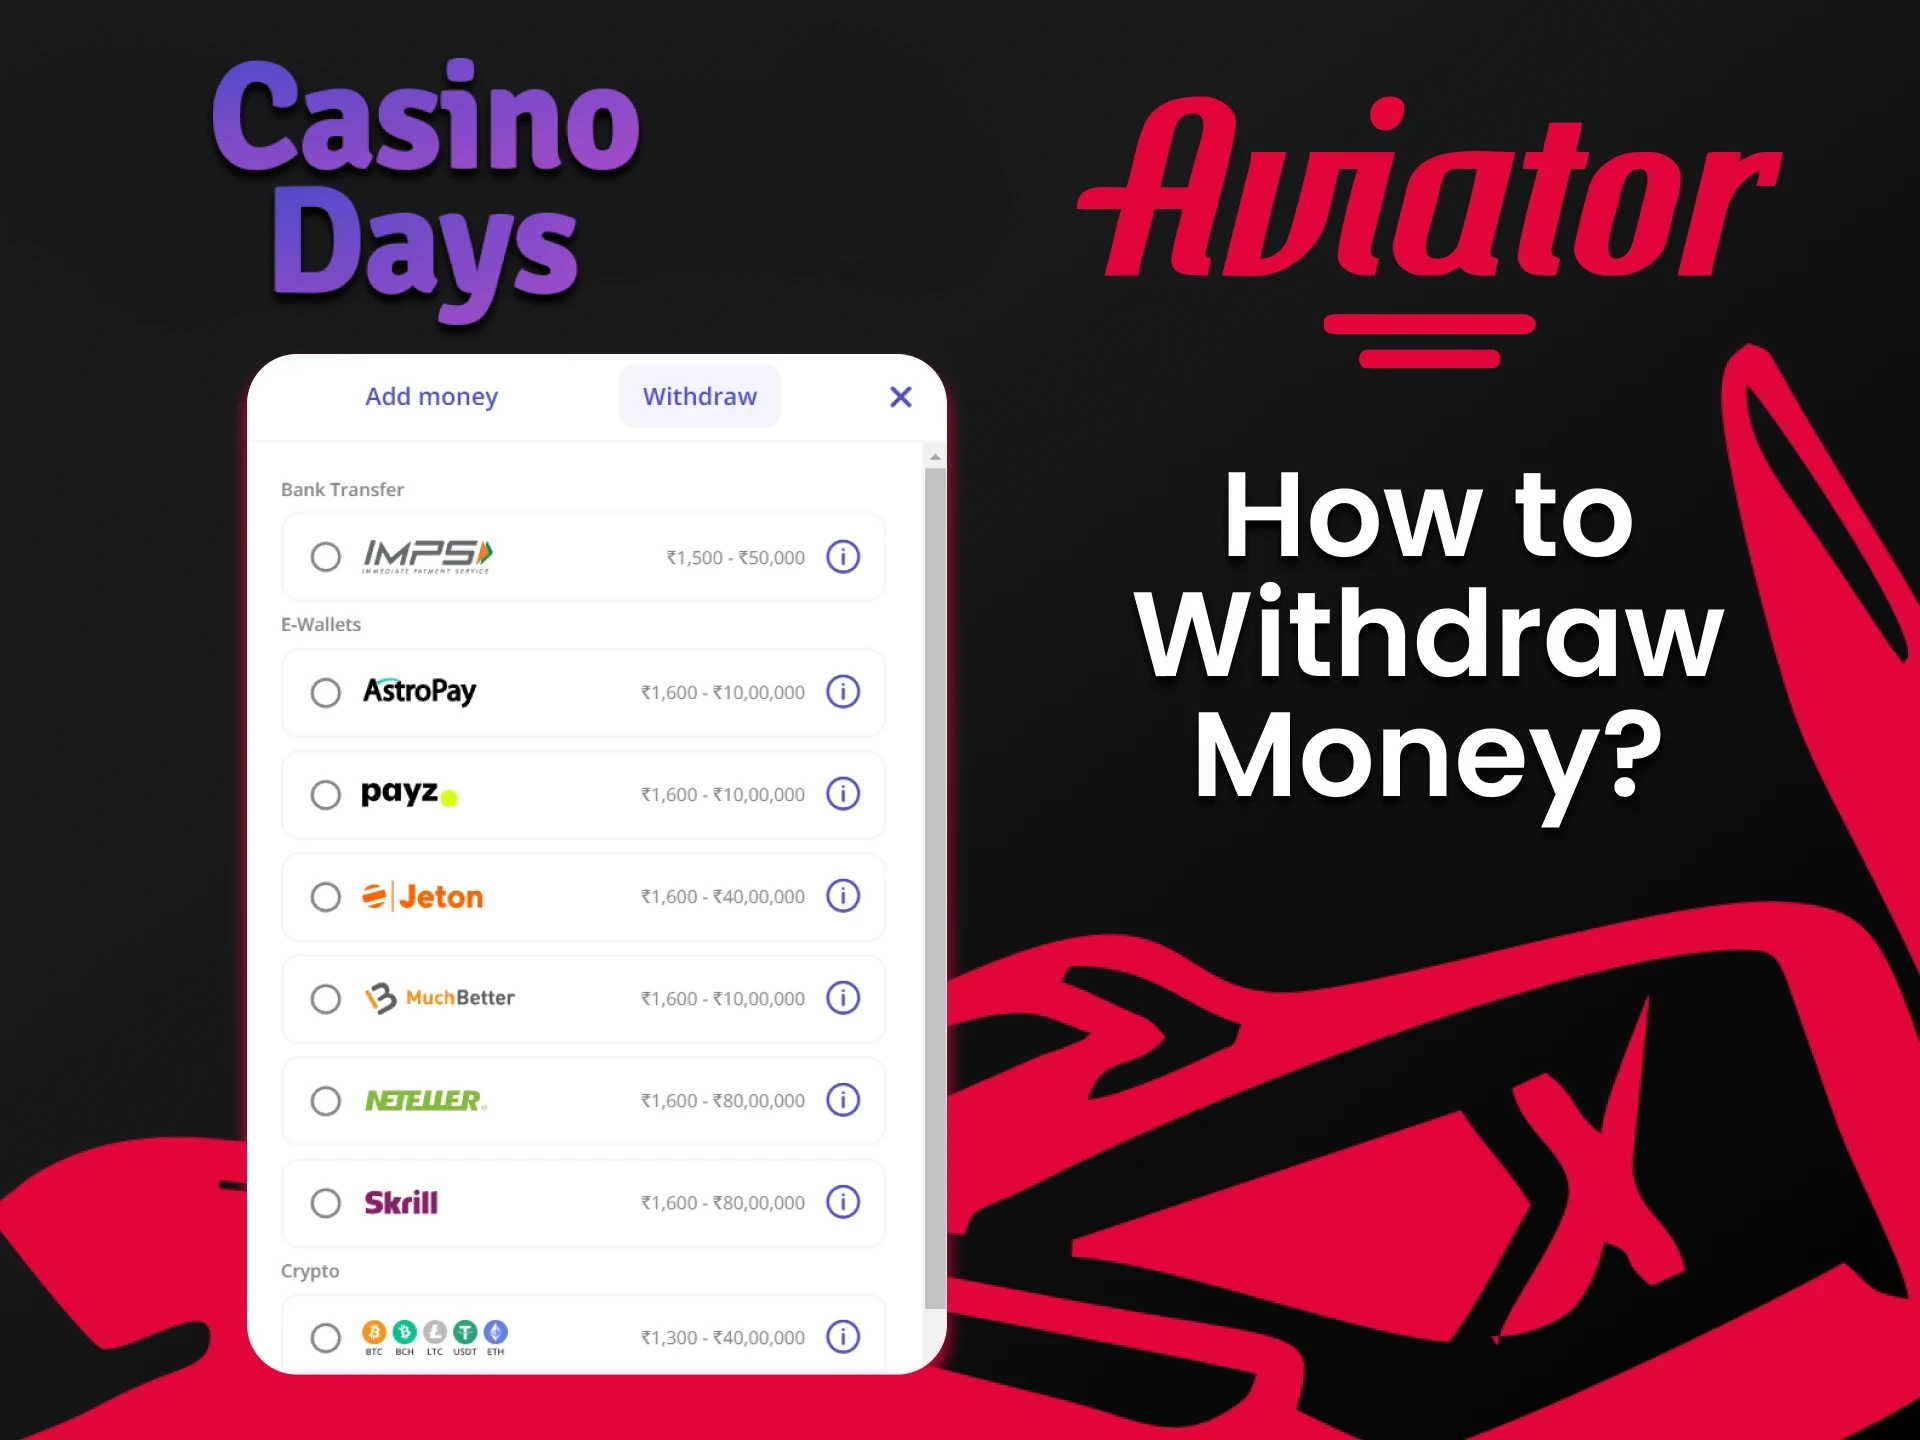 We will tell you how to withdraw funds for Aviator at Casino Days.